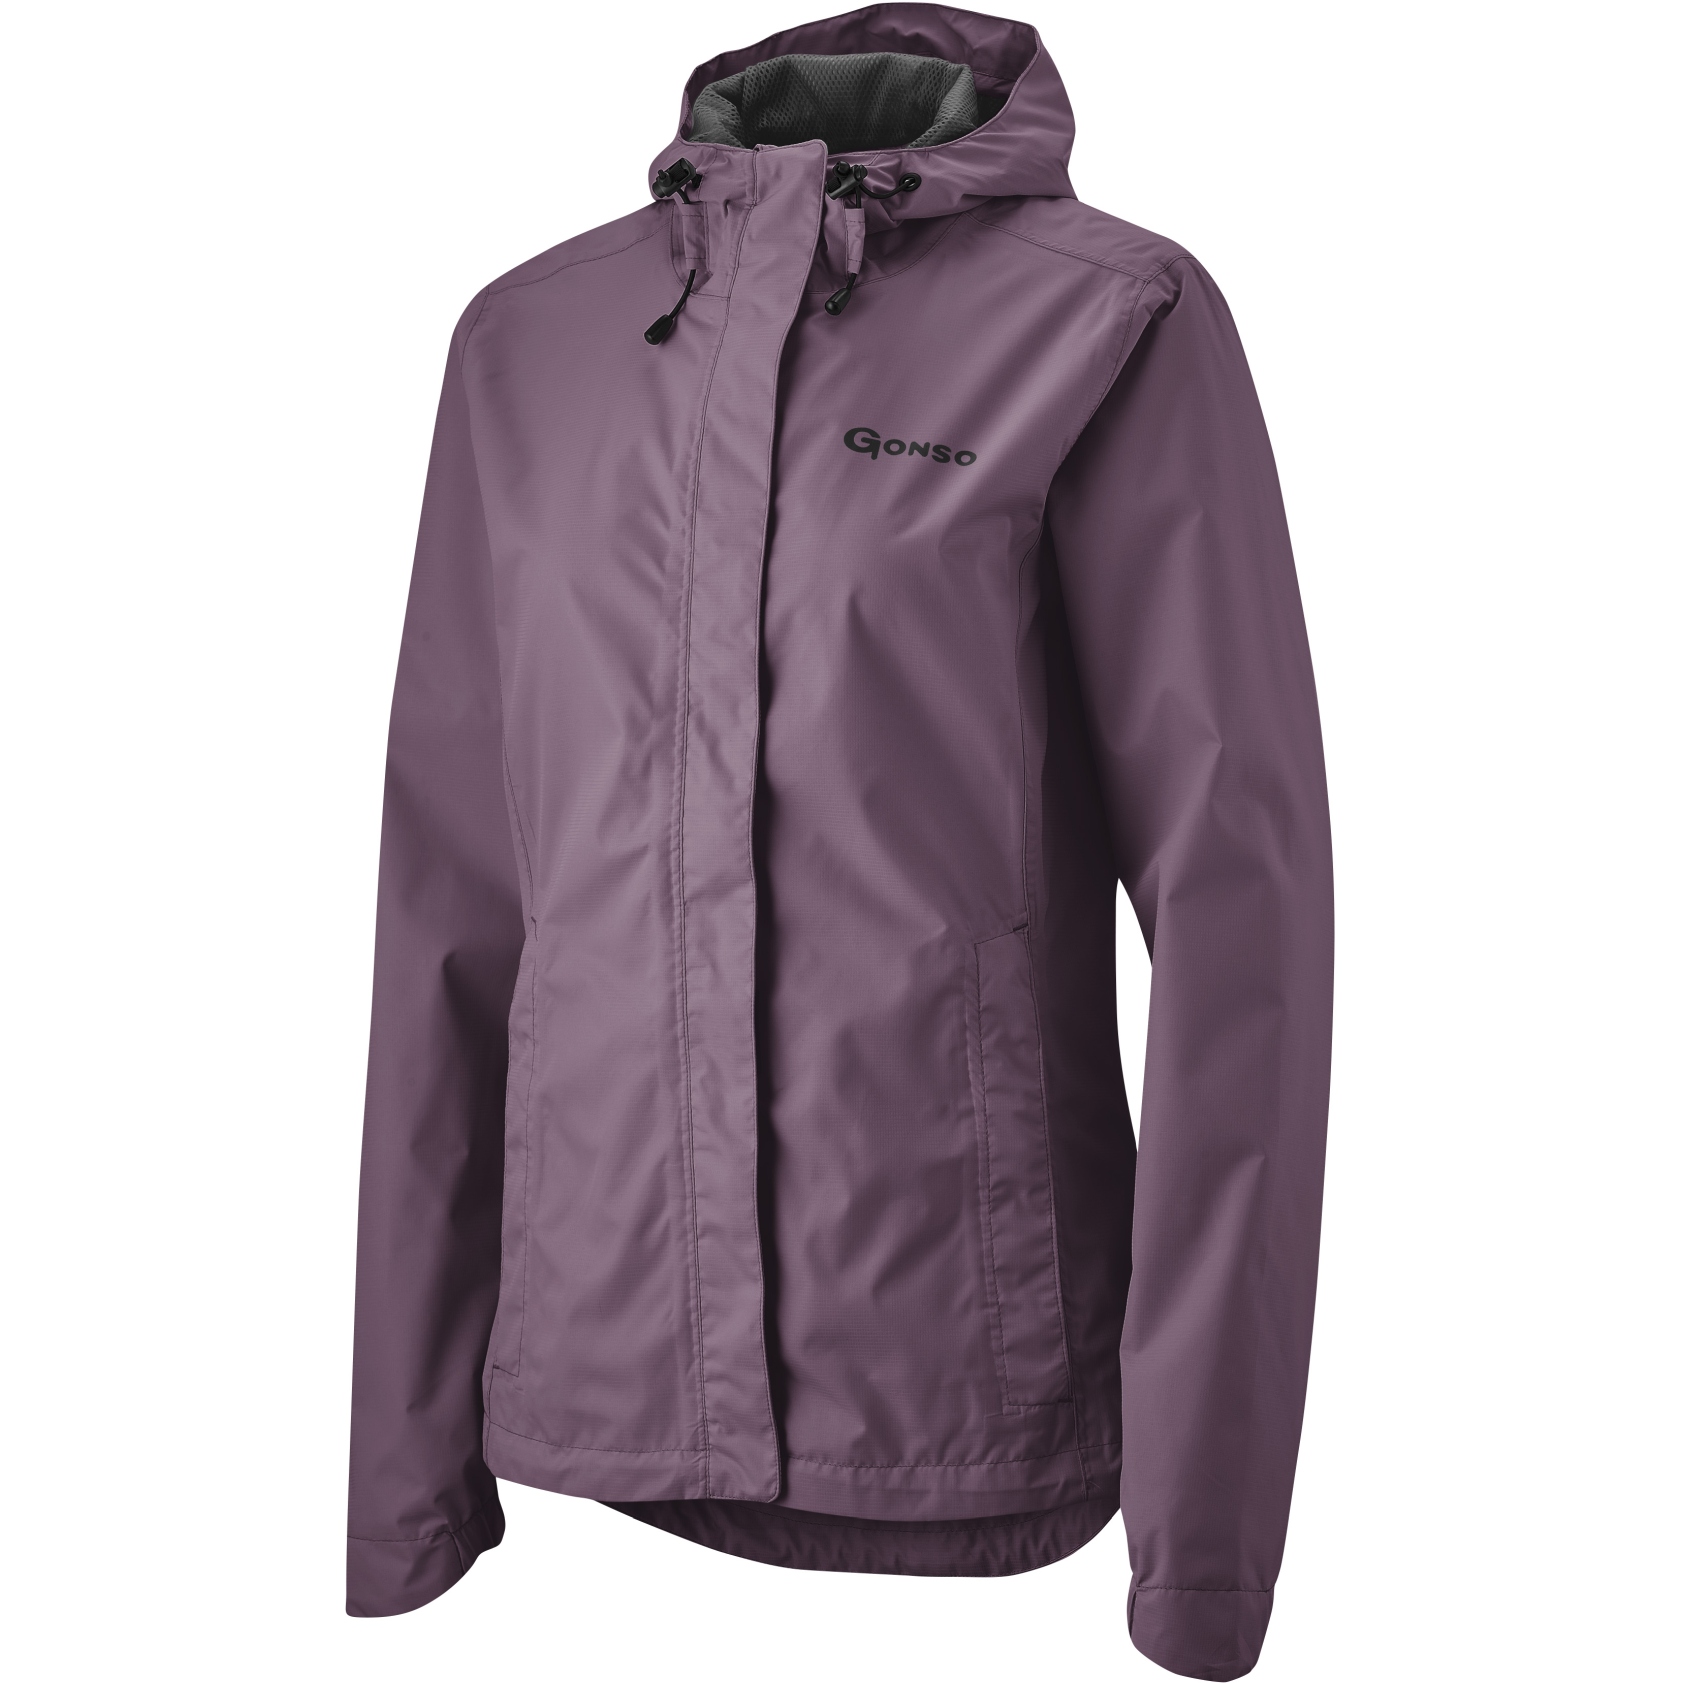 Picture of Gonso Sura Light All-Weather Jacket Women - Dark Plum